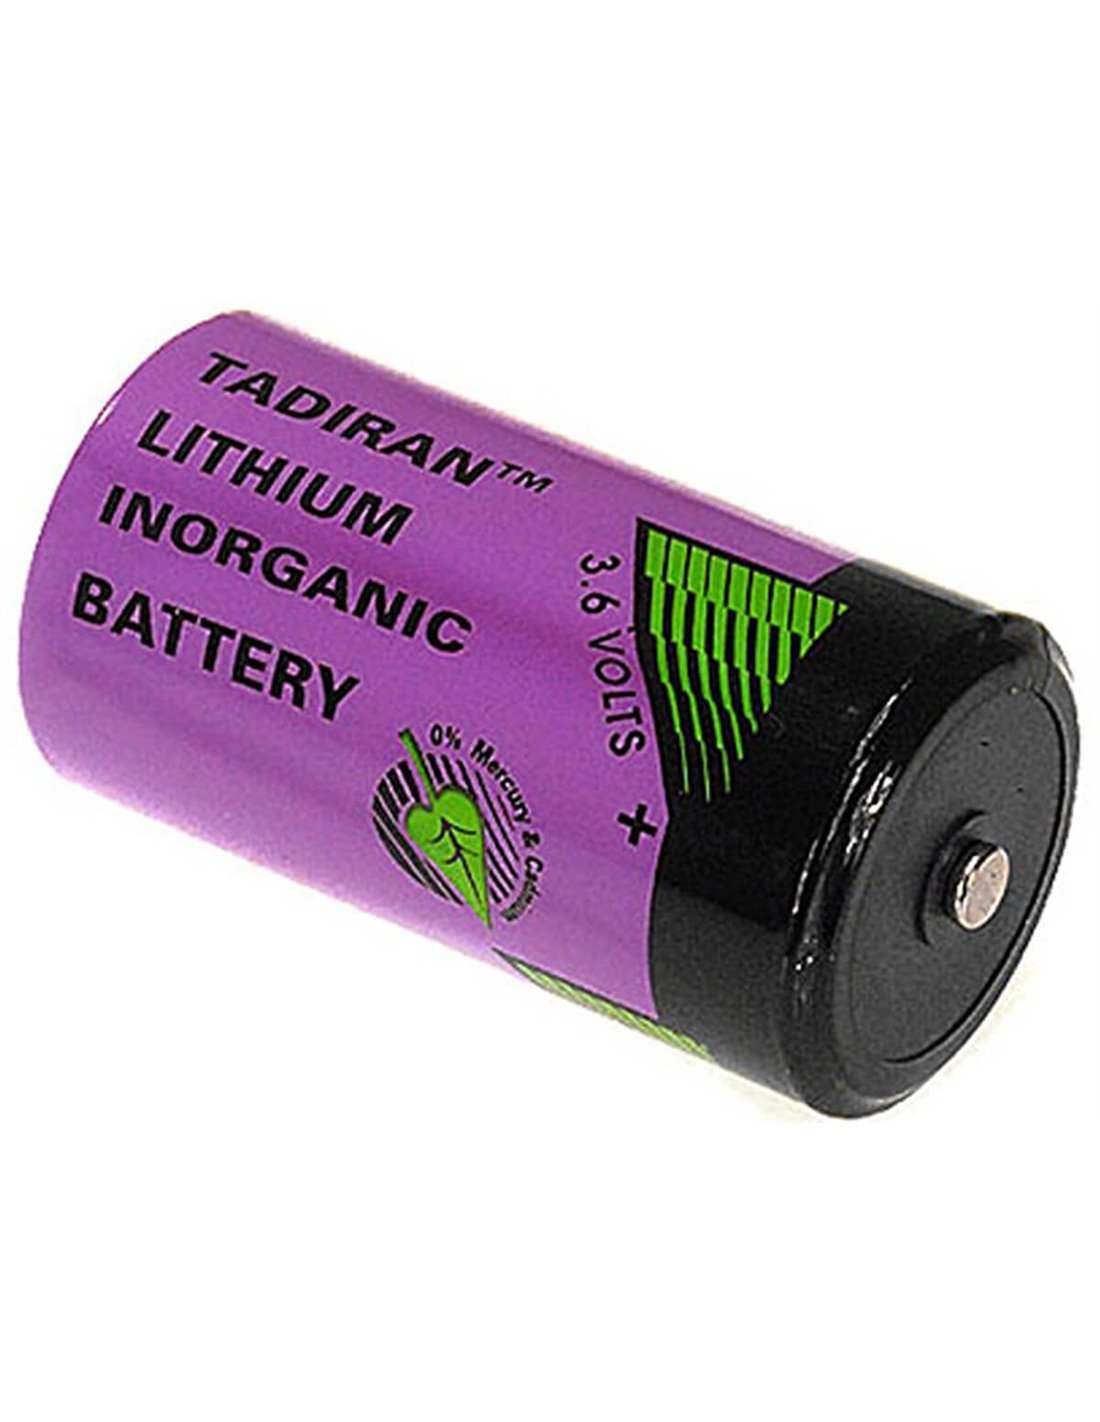 Tadiran TL-4920/S XOL Series 3.6V C Size 8500Mah Lithium Battery replaces ER26500 & LS26500 3.6V - Non Rechargeable